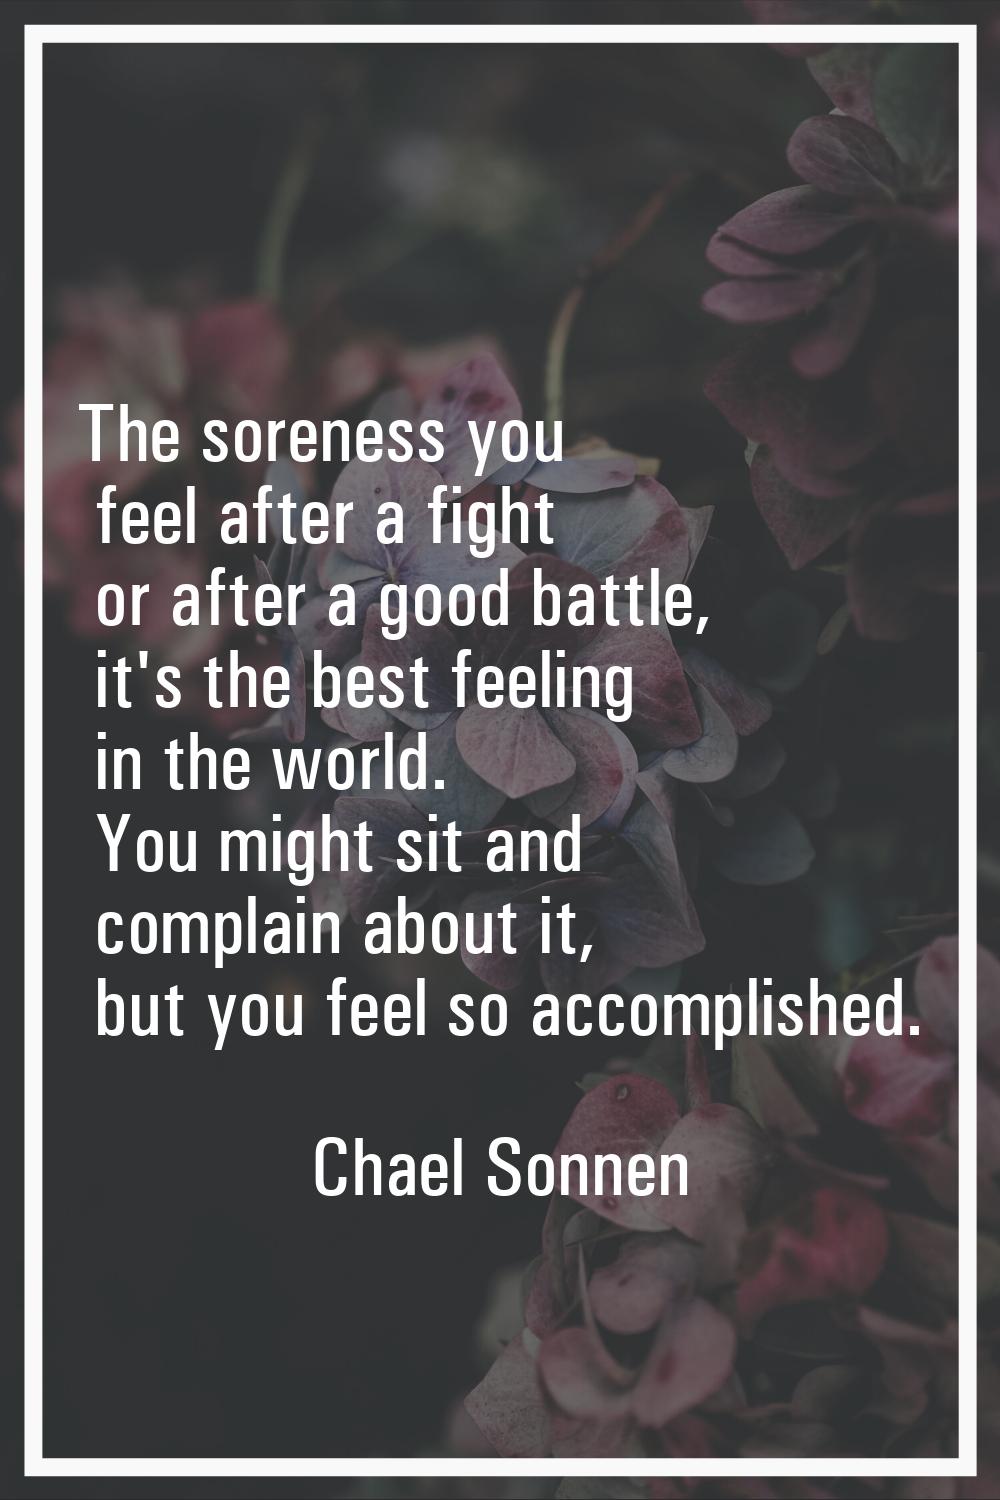 The soreness you feel after a fight or after a good battle, it's the best feeling in the world. You